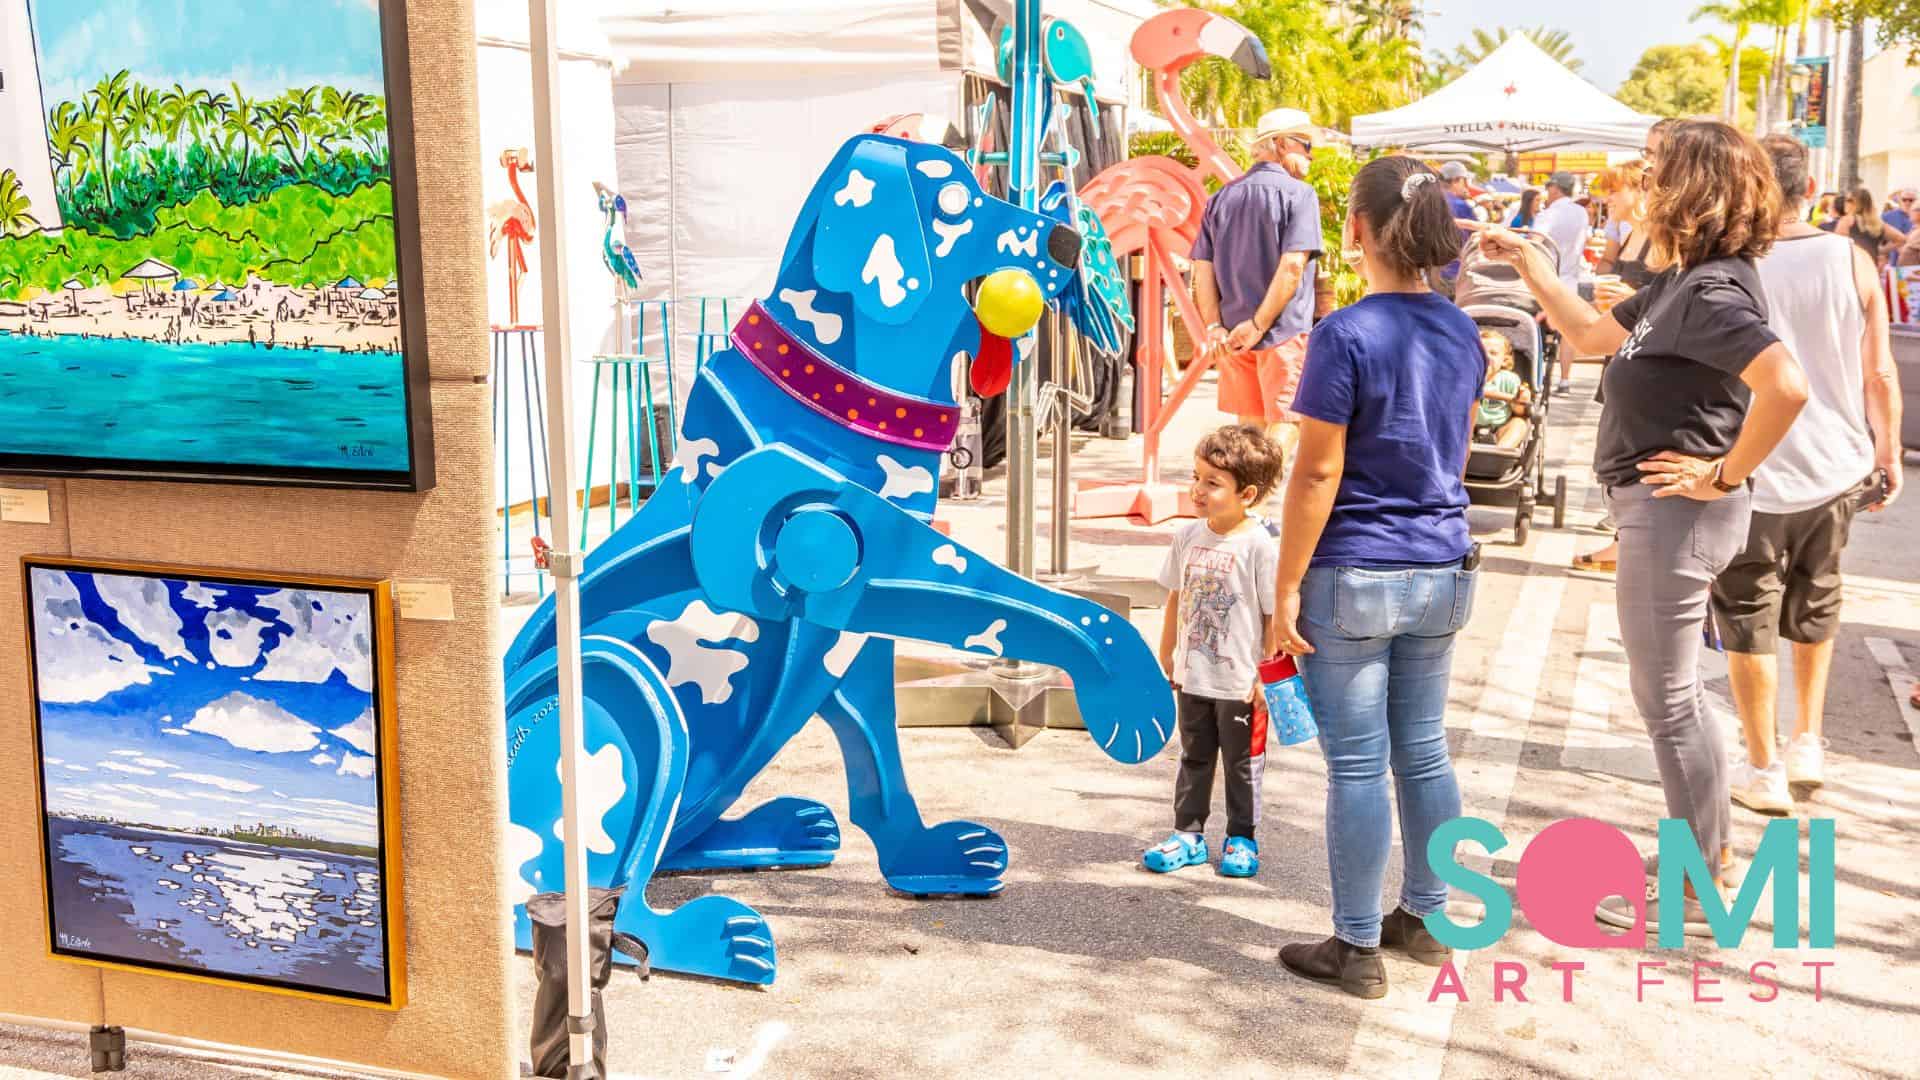 SOMI Art Fest: dog friendly event in South Miami